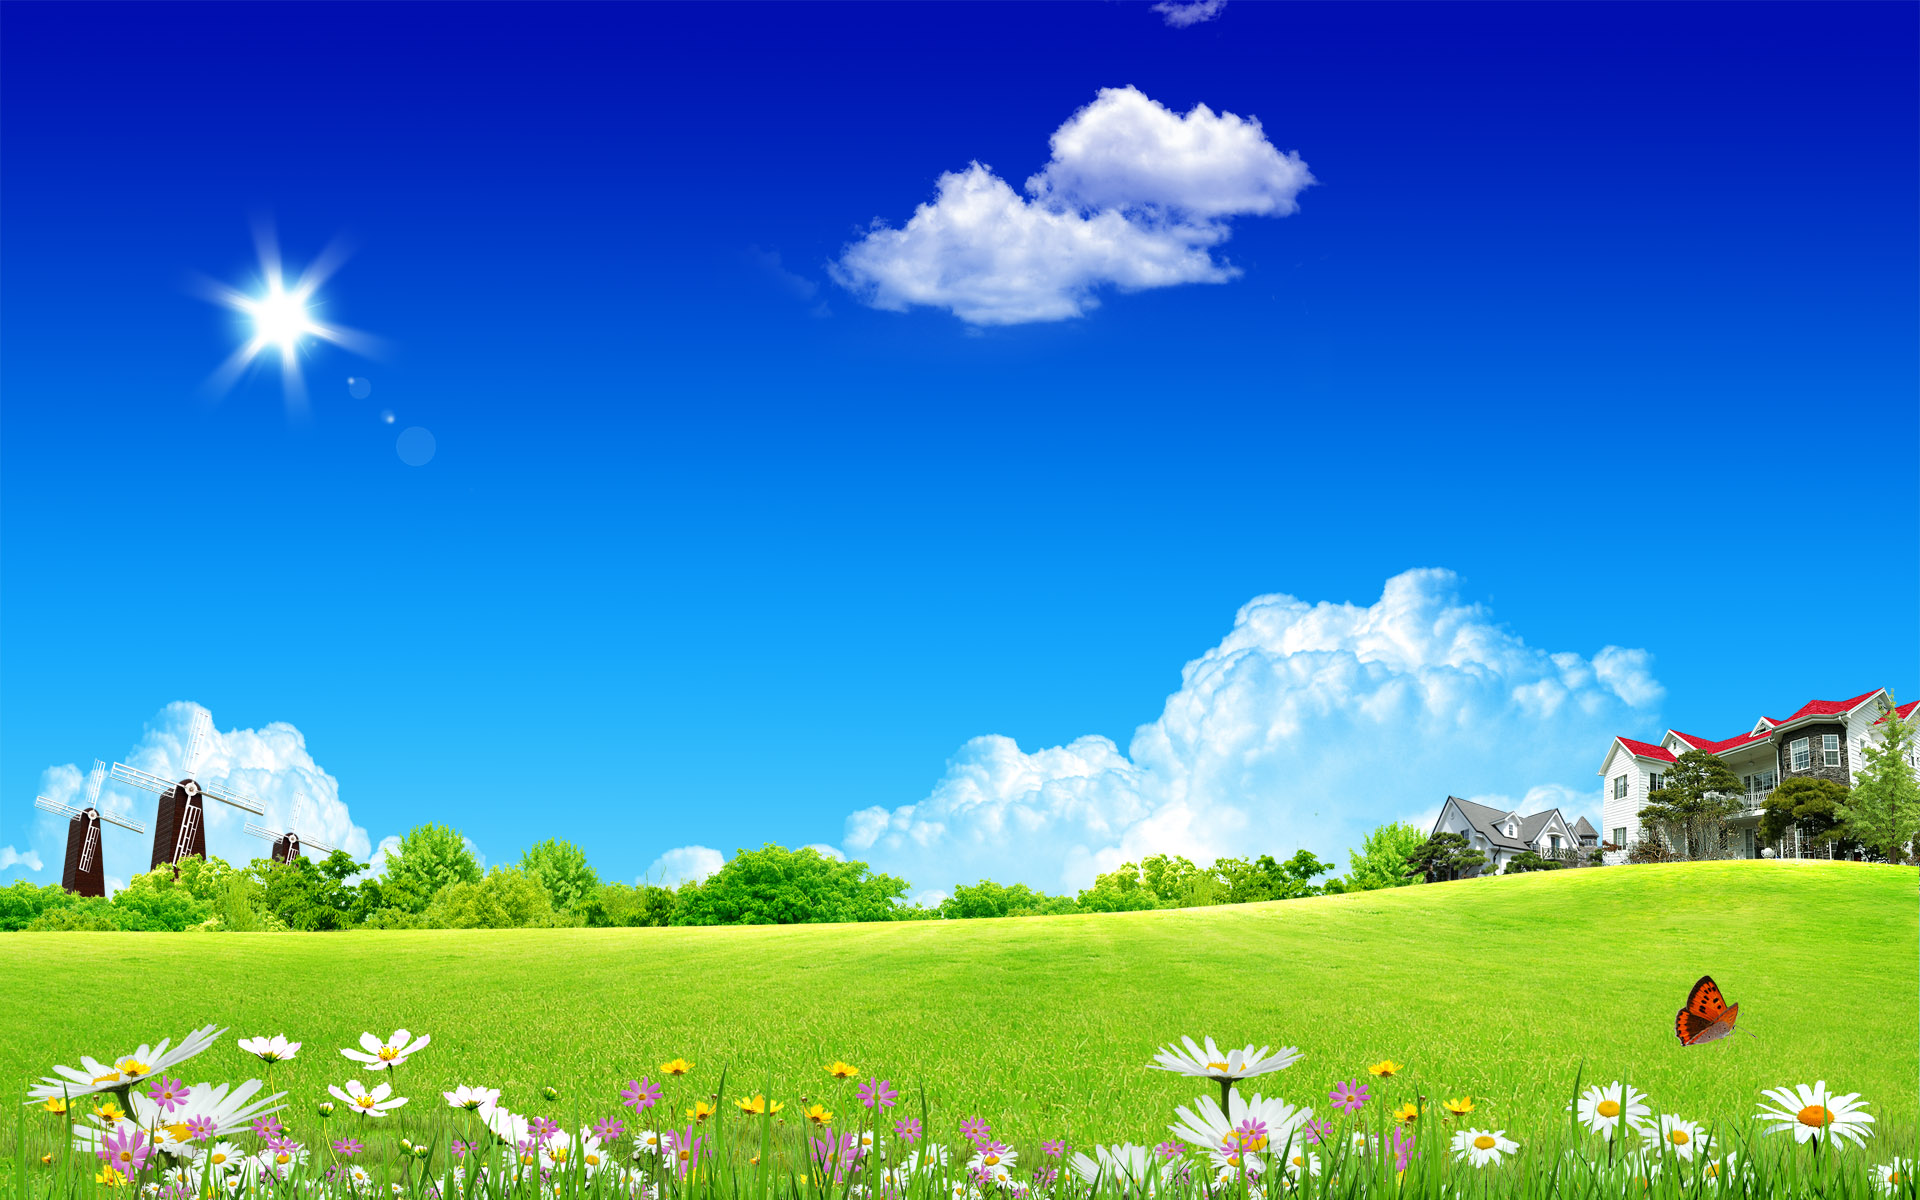 Free Scenery Wallpaper Includes a Clean Home Sky What an Amazing